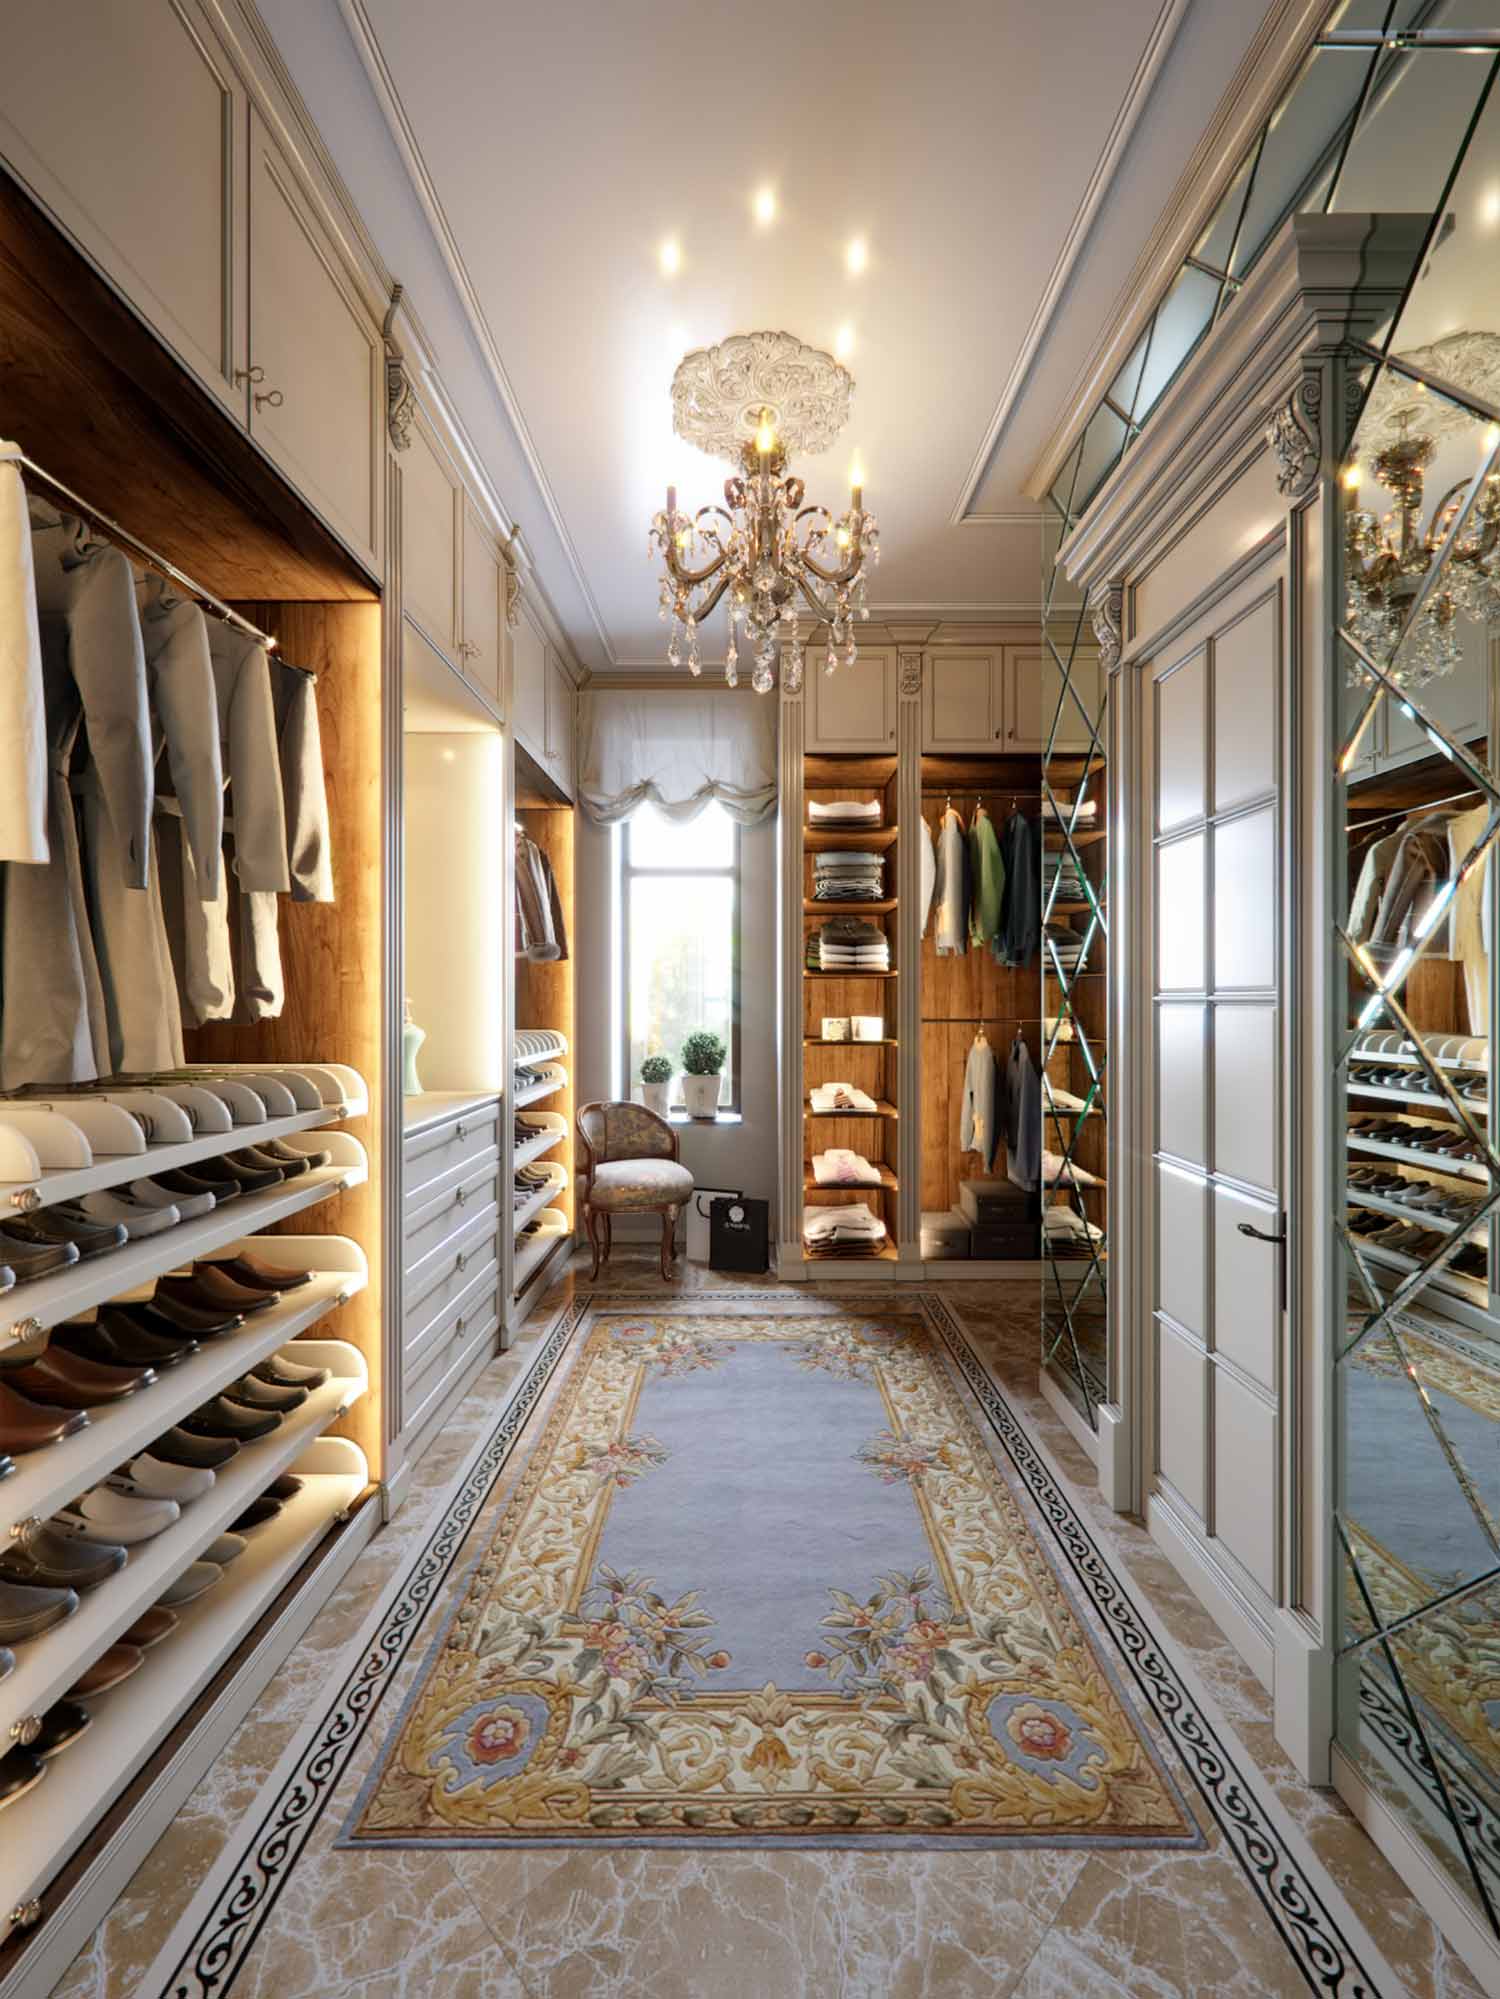 9 Walk in wardrobe with chandelier, french panelling, french chair and mirrors